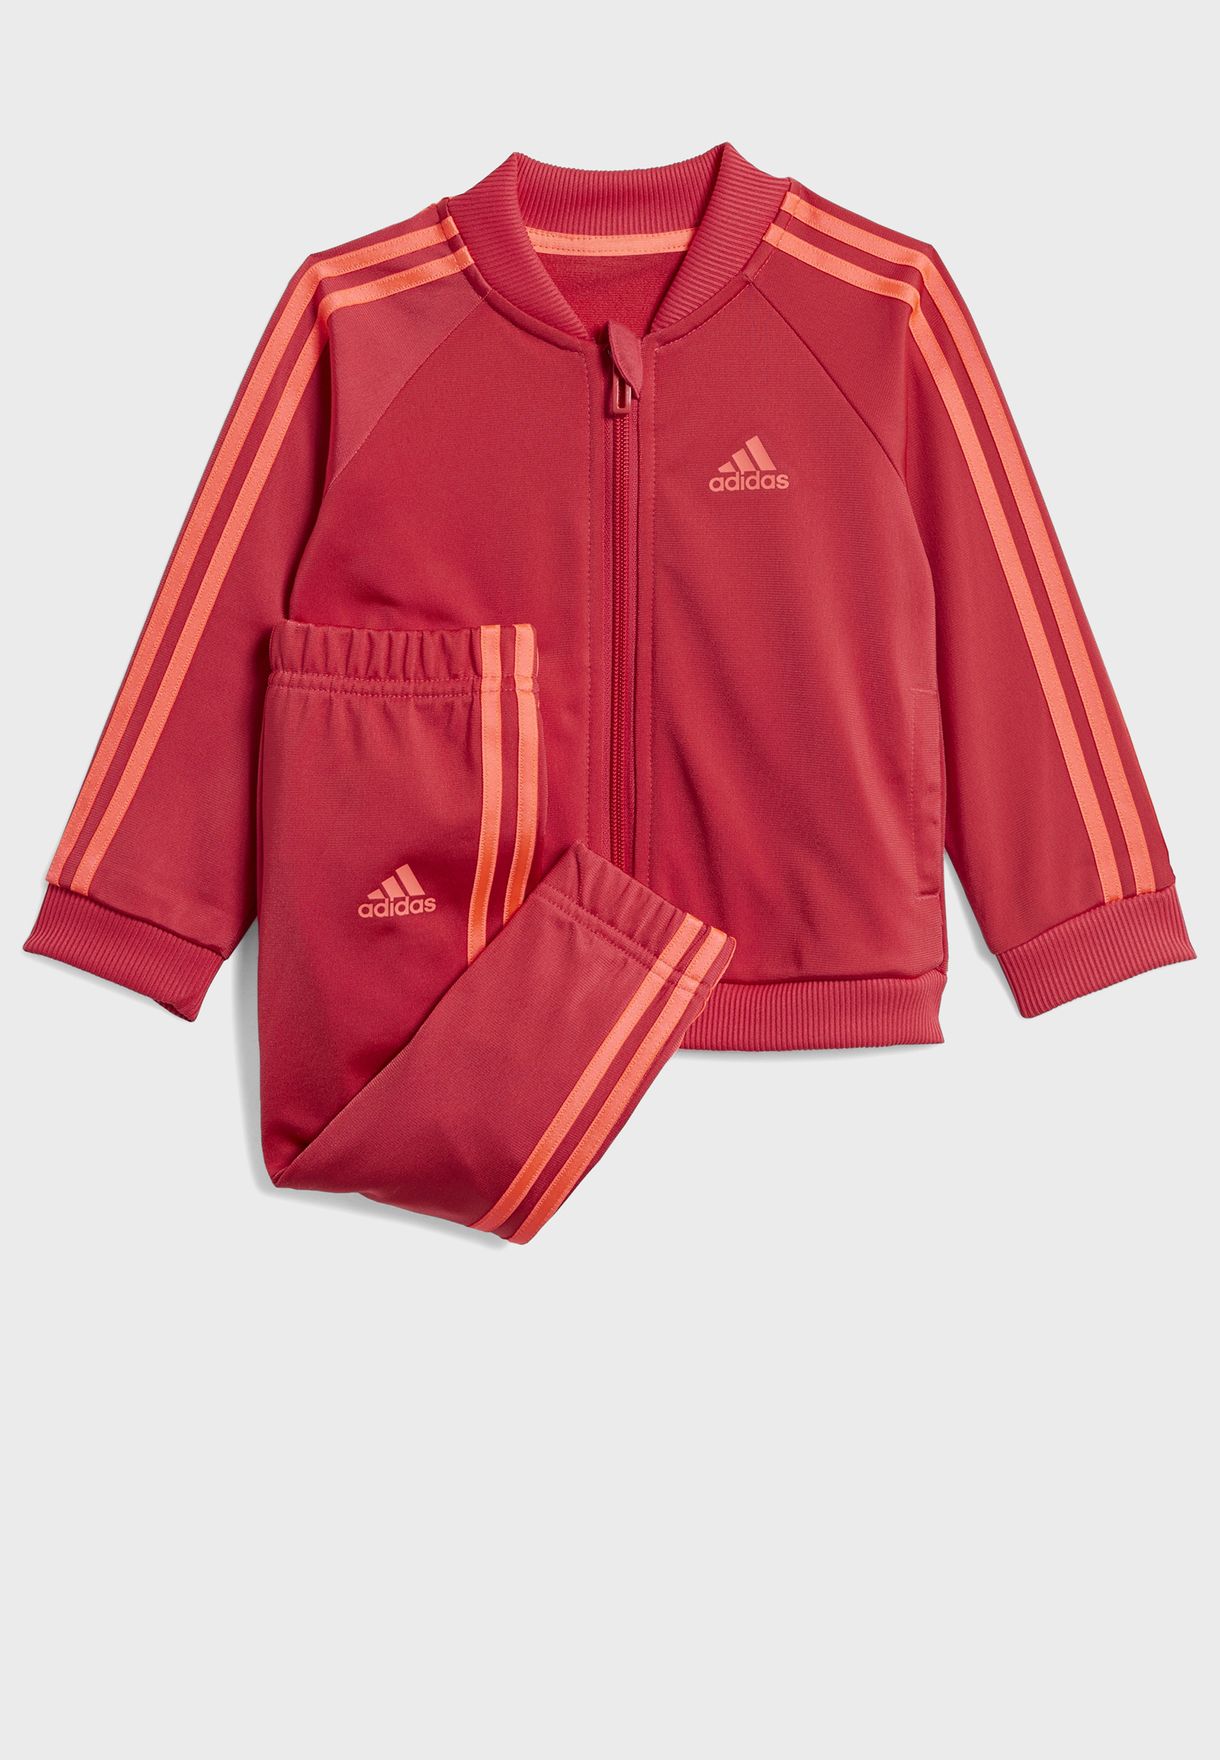 what is the price of adidas tracksuit